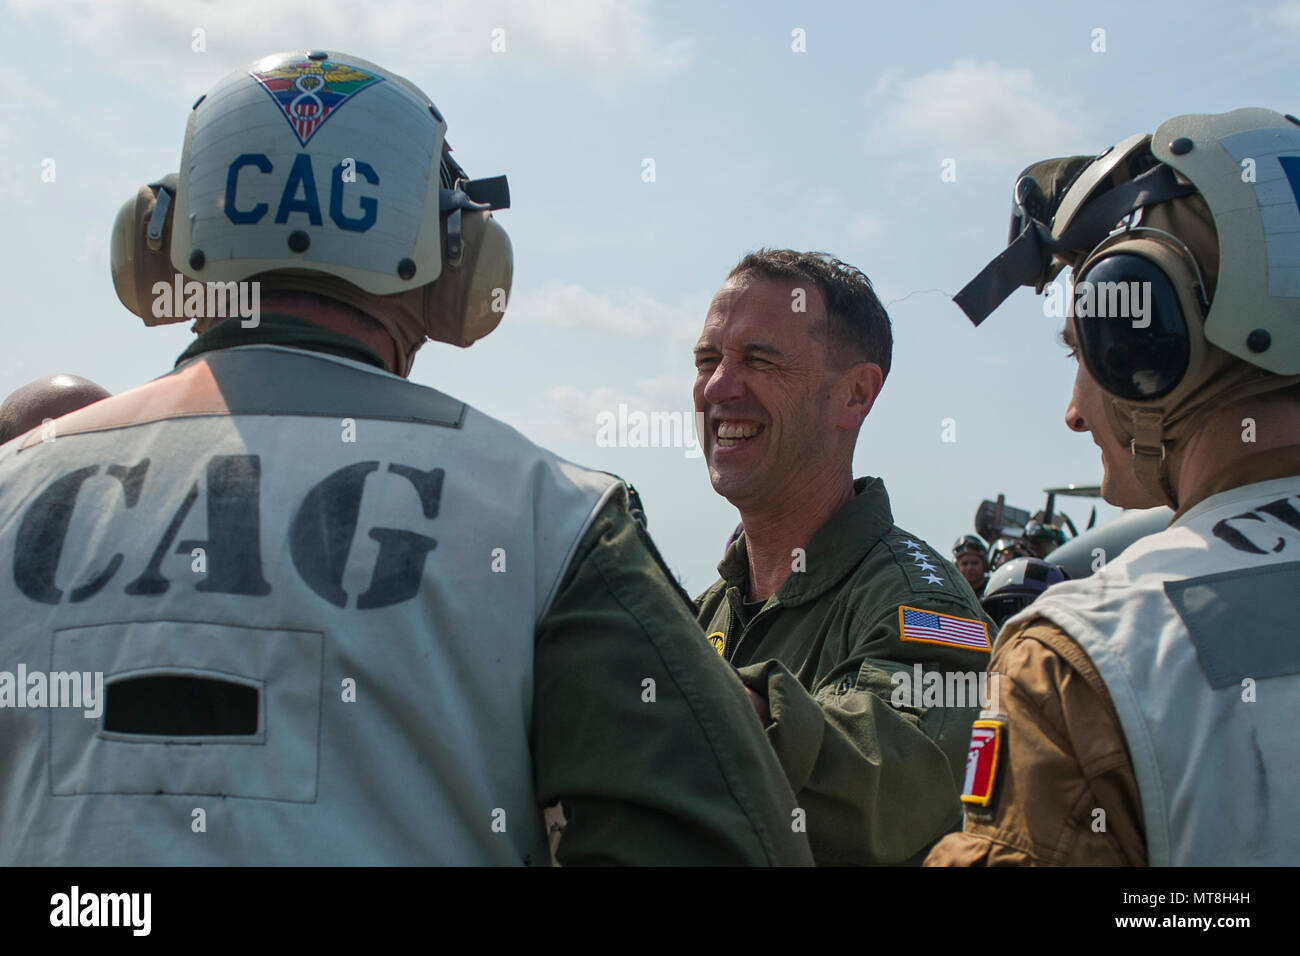 180514-N-AF077-0102 ATLANTIC OCEAN (May 14, 2018) Chief of Naval Operations (CNO) Adm. John Richardson, center, speaks with Capt. James McCall, left, commander of Carrier Air Wing (CVW) 8, and Commander Marc, commander of the French Carrier Air Wing during the CNO’s visit aboard the aircraft carrier USS George H.W. Bush (CVN 77). The ship is underway in the Atlantic Ocean conducting carrier air wing exercises with the French navy to strengthen partnerships and deepen interoperability between the two nations' naval forces. (U.S. Navy photo by Mass Communication Specialist 1st Class Sean Hurt) Stock Photo